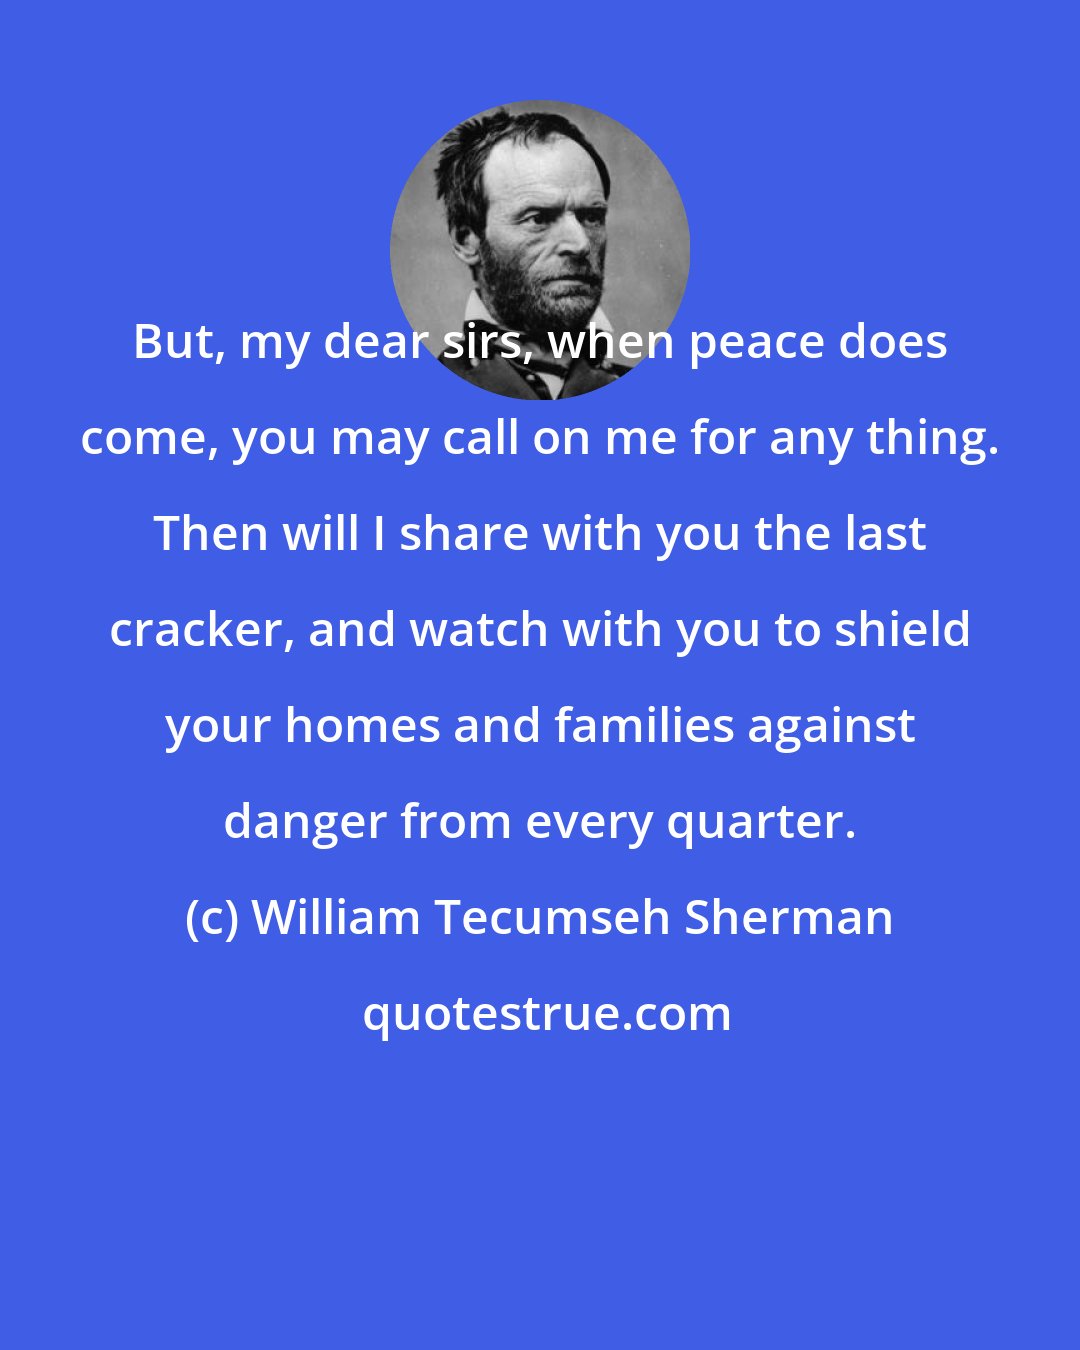 William Tecumseh Sherman: But, my dear sirs, when peace does come, you may call on me for any thing. Then will I share with you the last cracker, and watch with you to shield your homes and families against danger from every quarter.